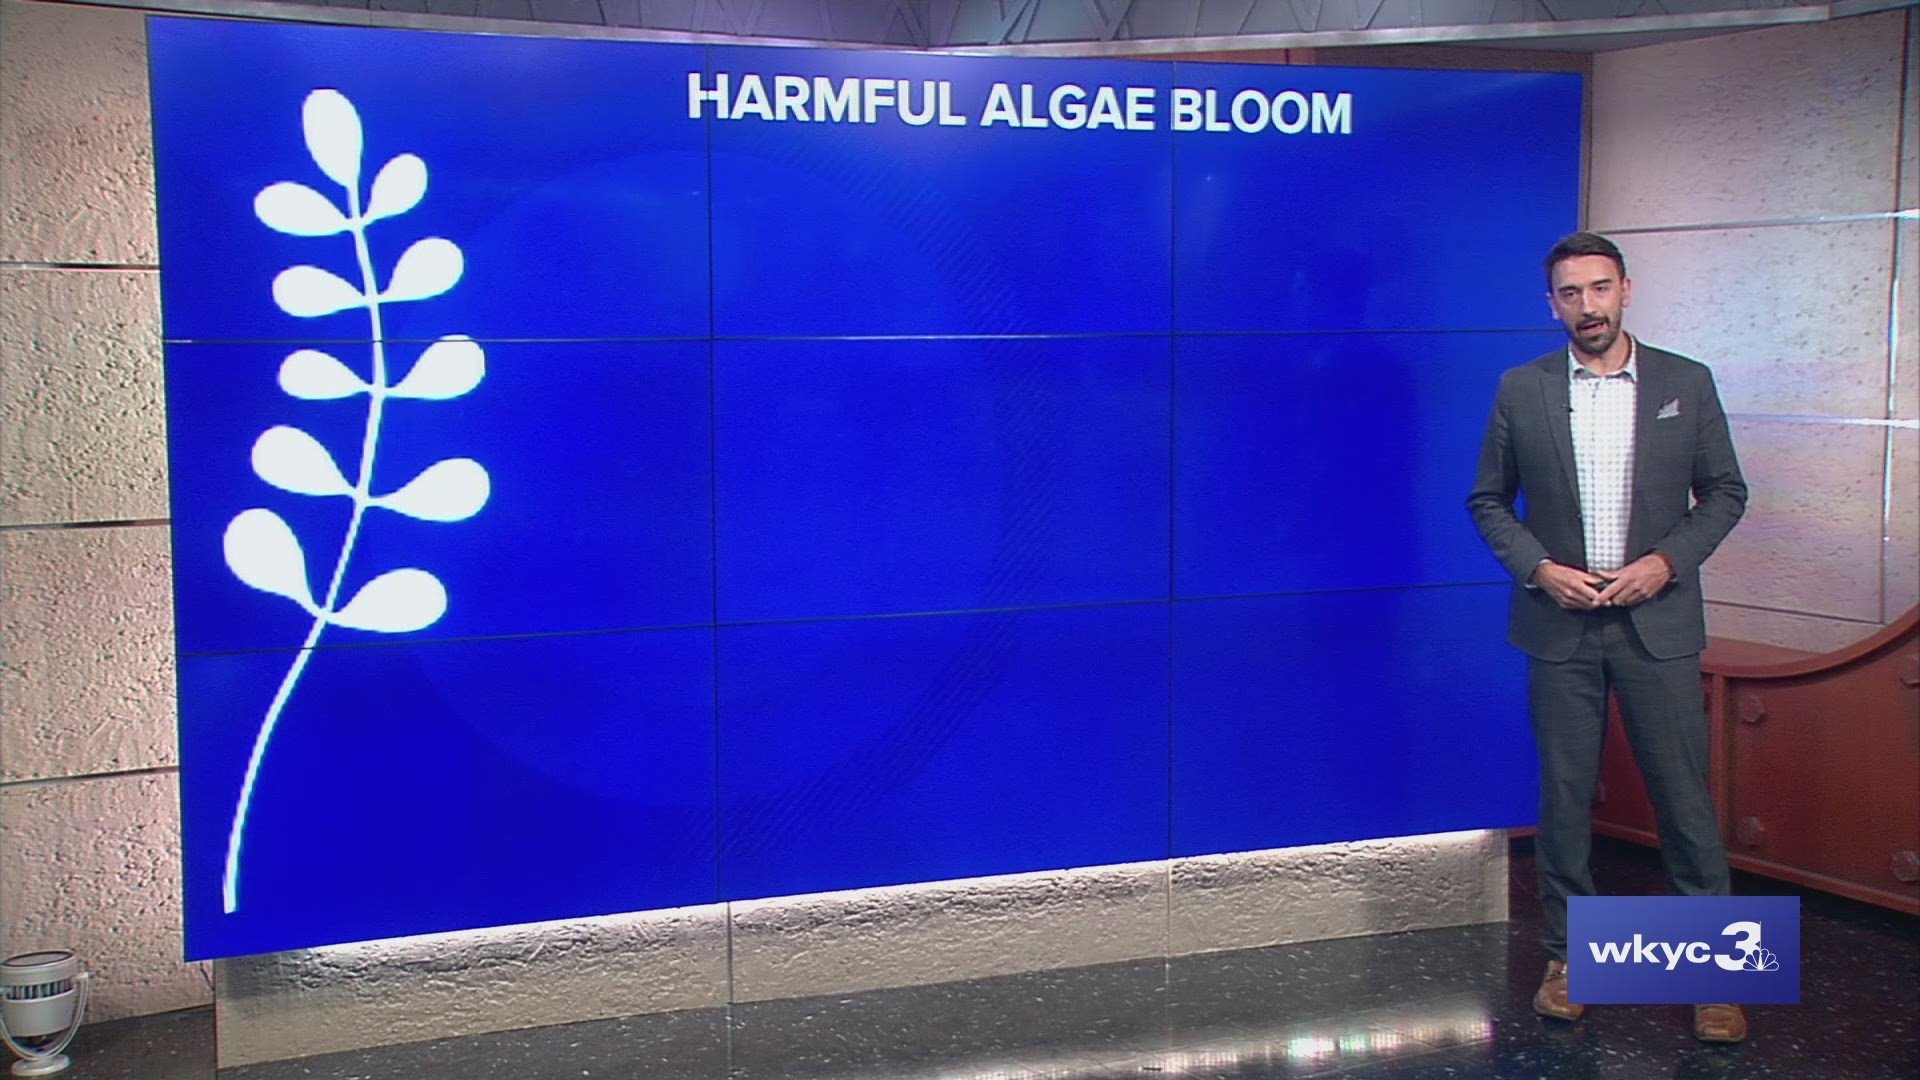 WKYC Meteorologist Matt Wintz is here to help us better understand this year's algae bloom and how it compares to past years. #3weather